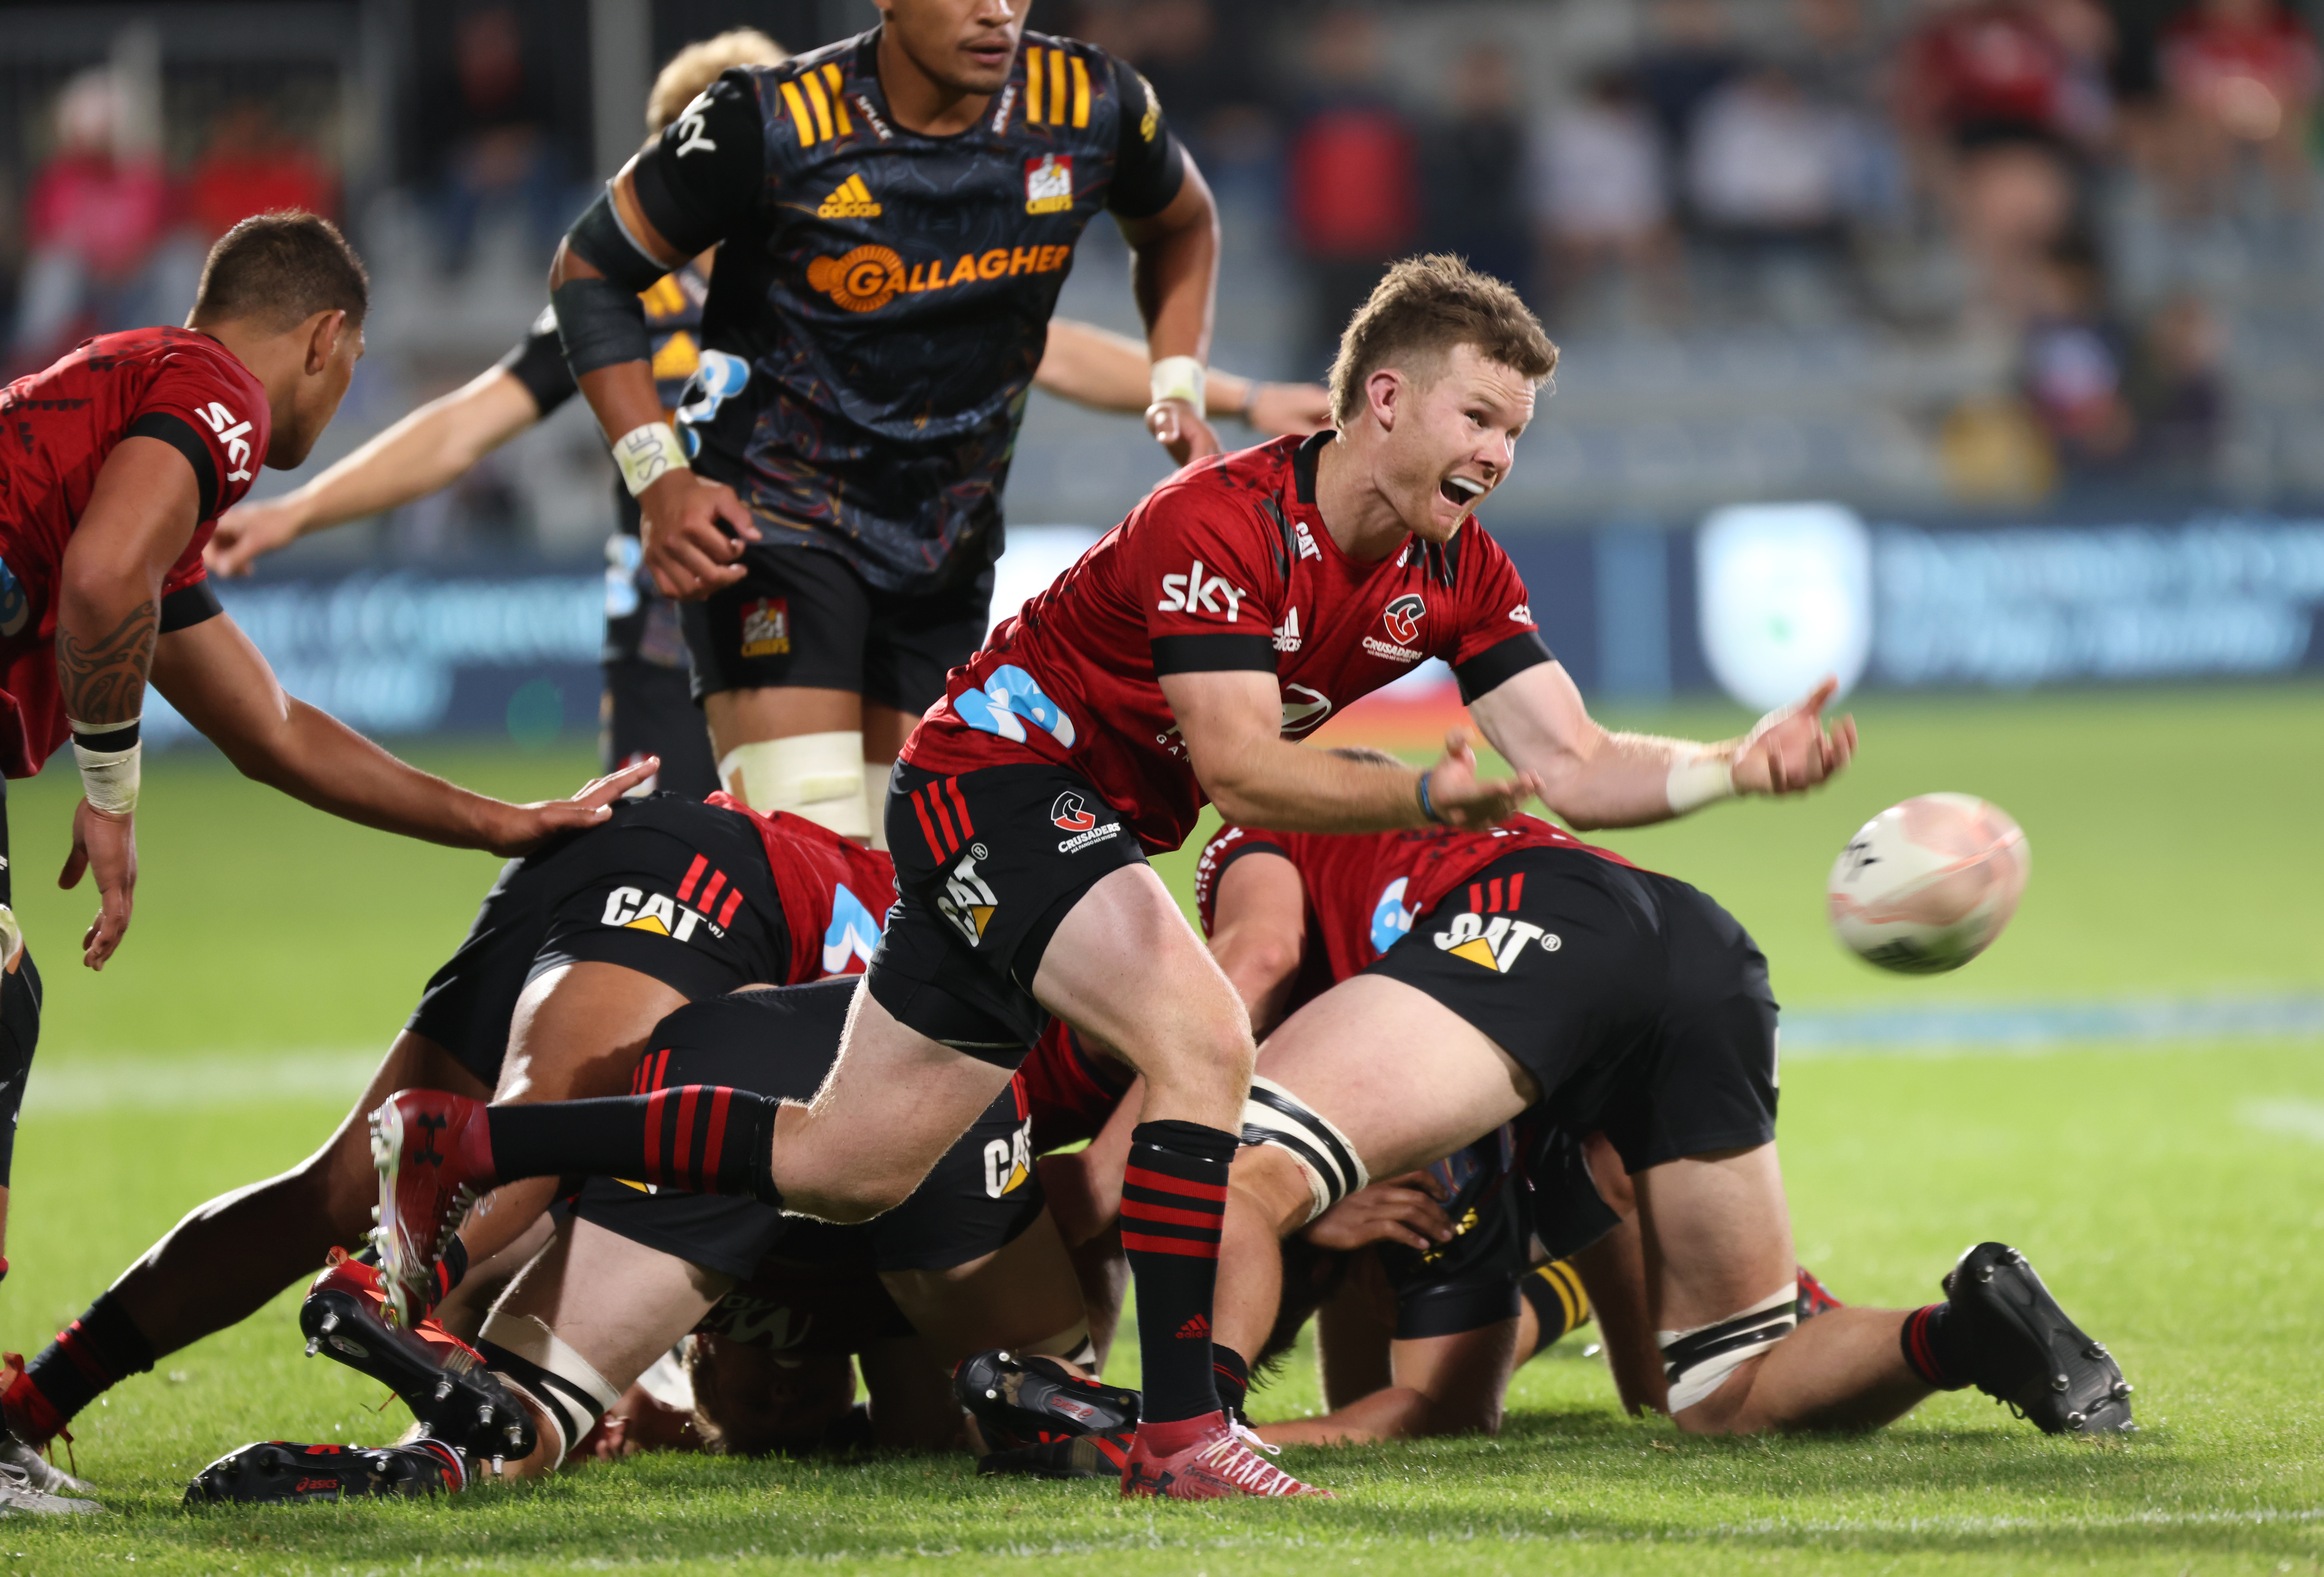 Round 8 Preview Gallagher Chiefs v Crusaders (2021) » superrugby.co.nz